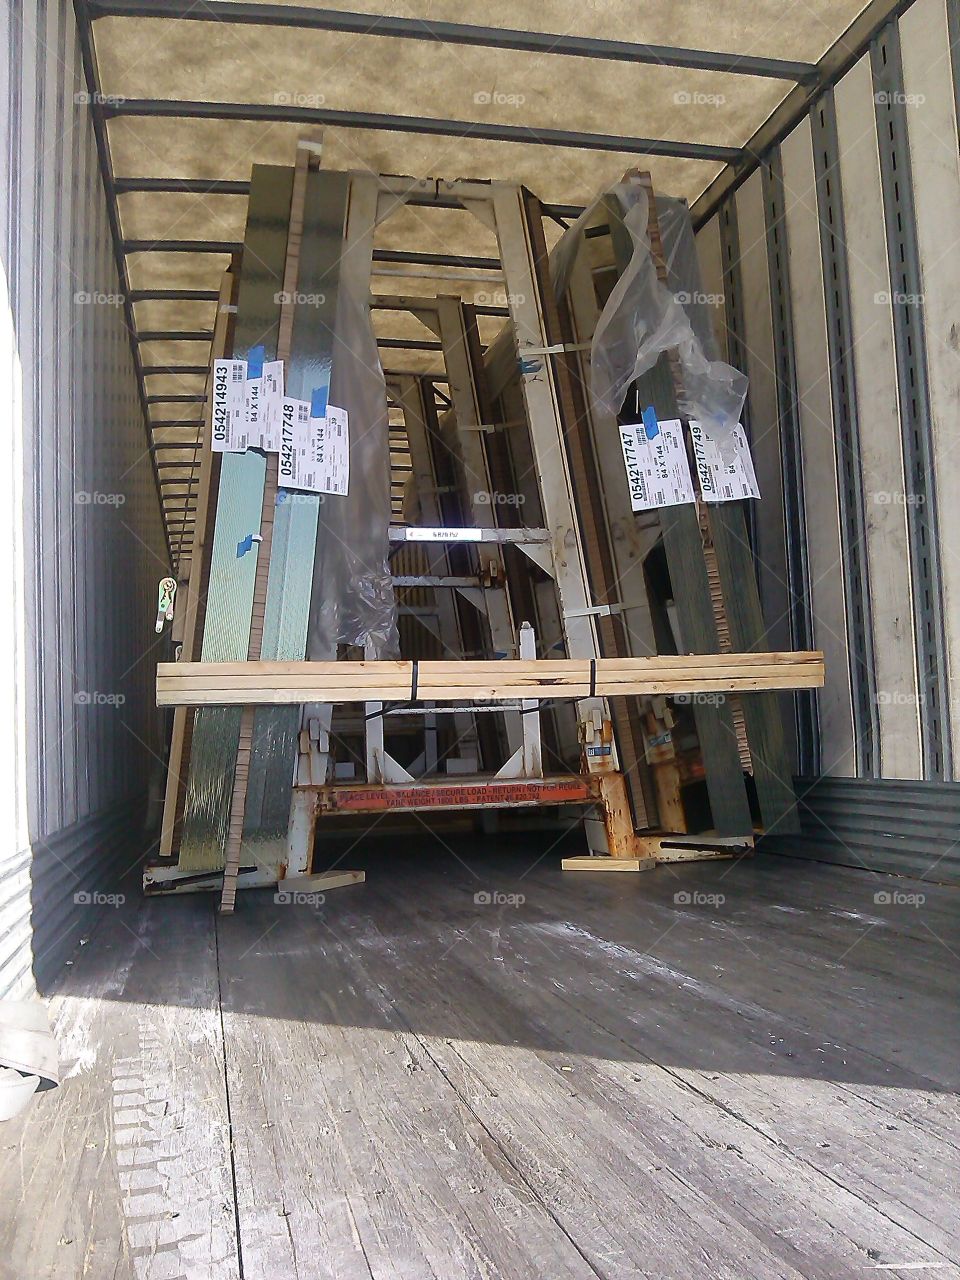 Secure The Load. Large plates of glass are secured for their journey across the country.